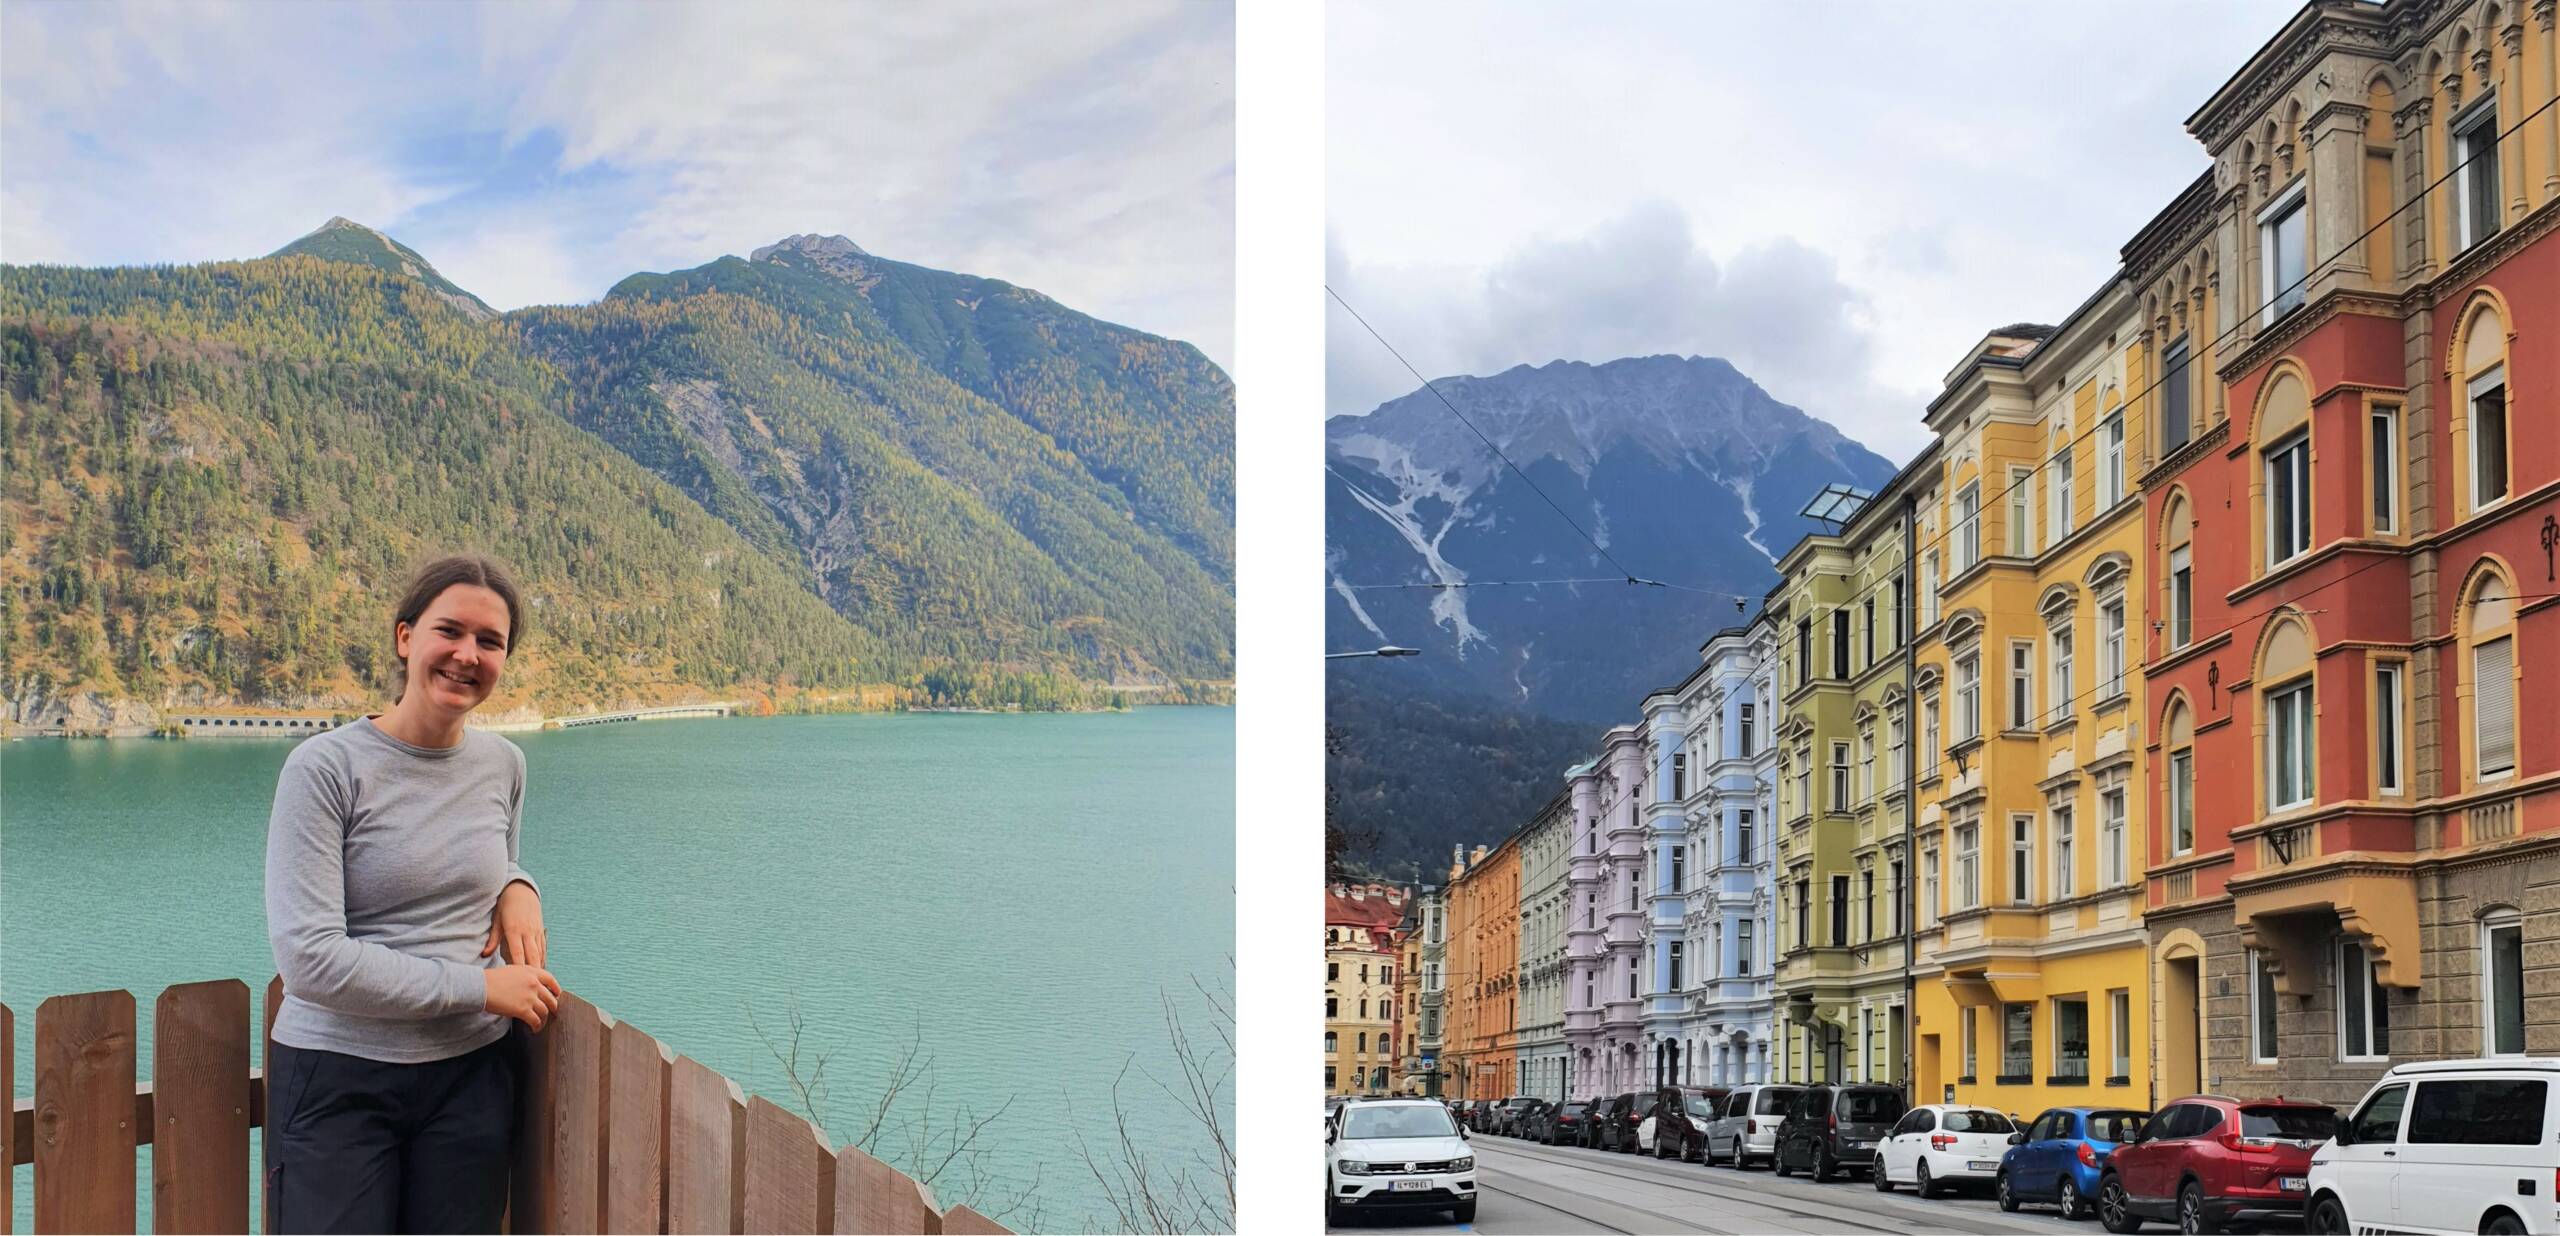 Hiking around Achensee and the lovely colorful houses of Innsbruck (my favourite part of the city)